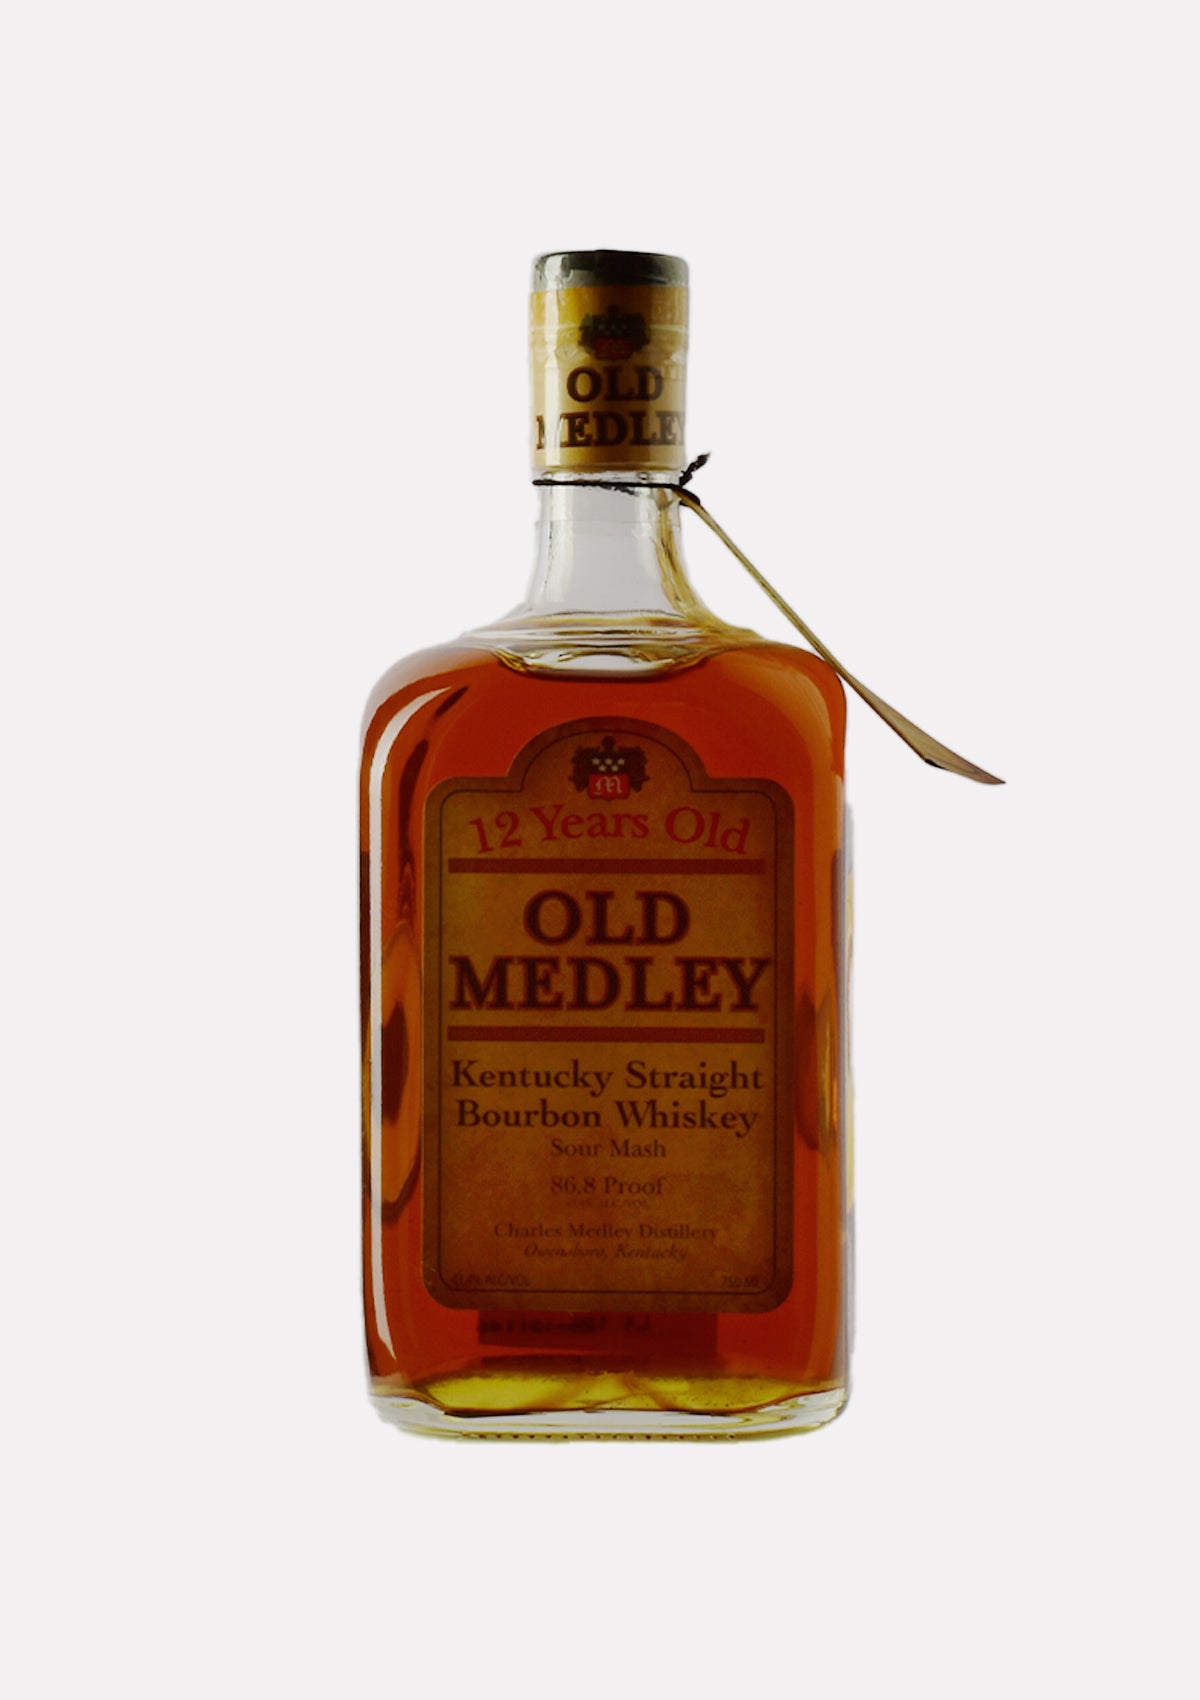 Old Medley Kentucky Straight Bourbon Whiskey 12 years